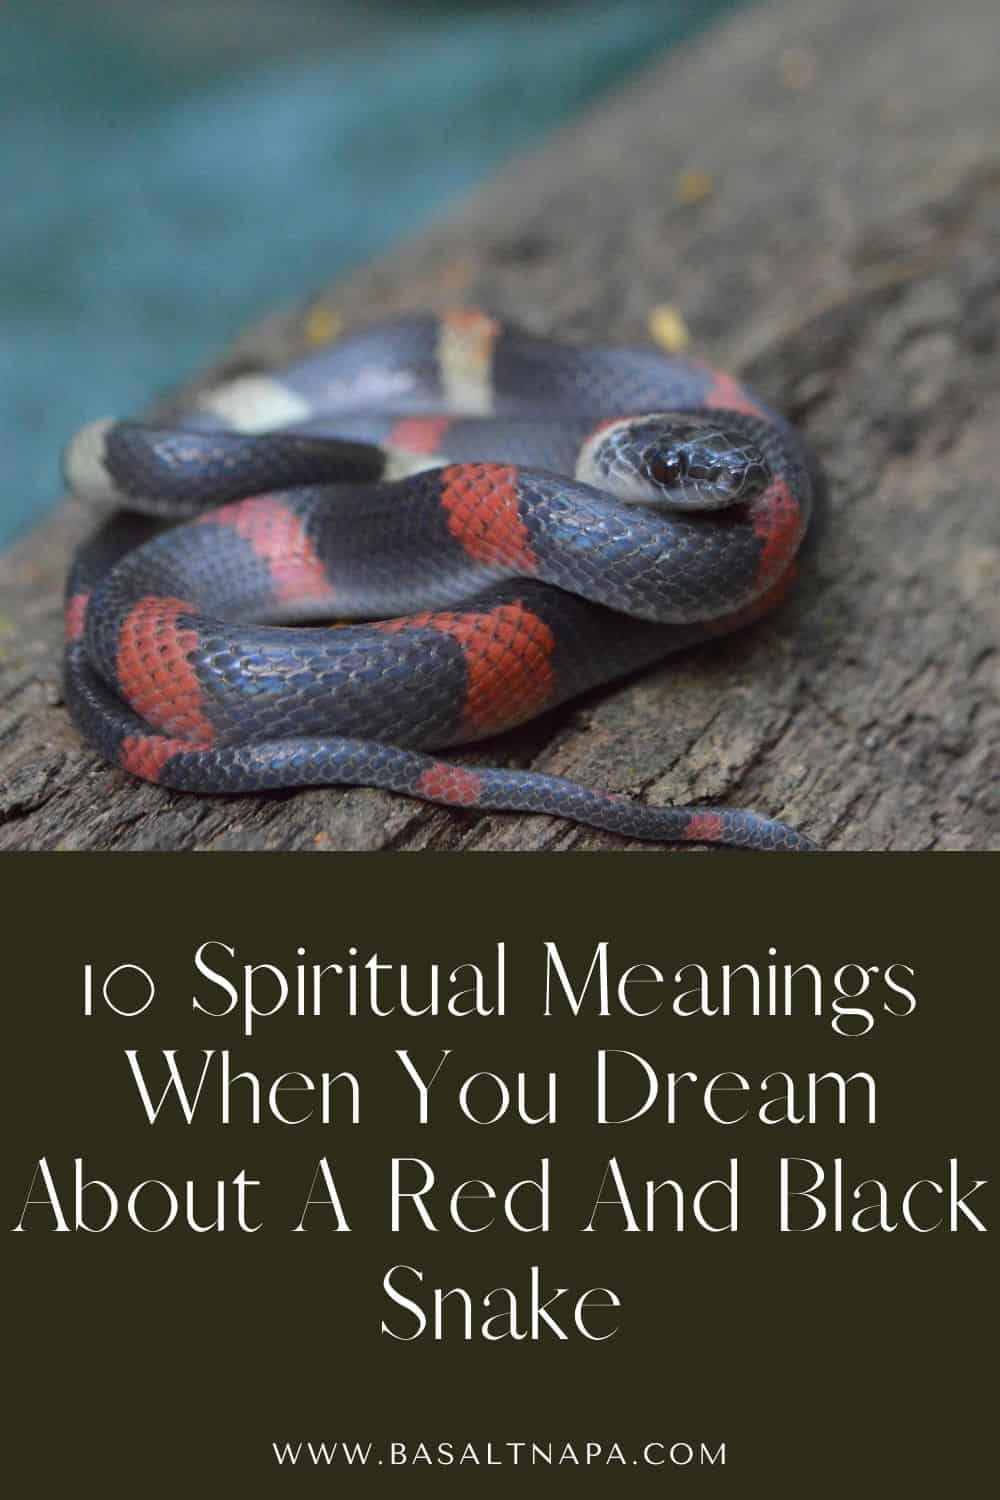 10 Spiritual Meanings When You Dream About A Red And Black Snake